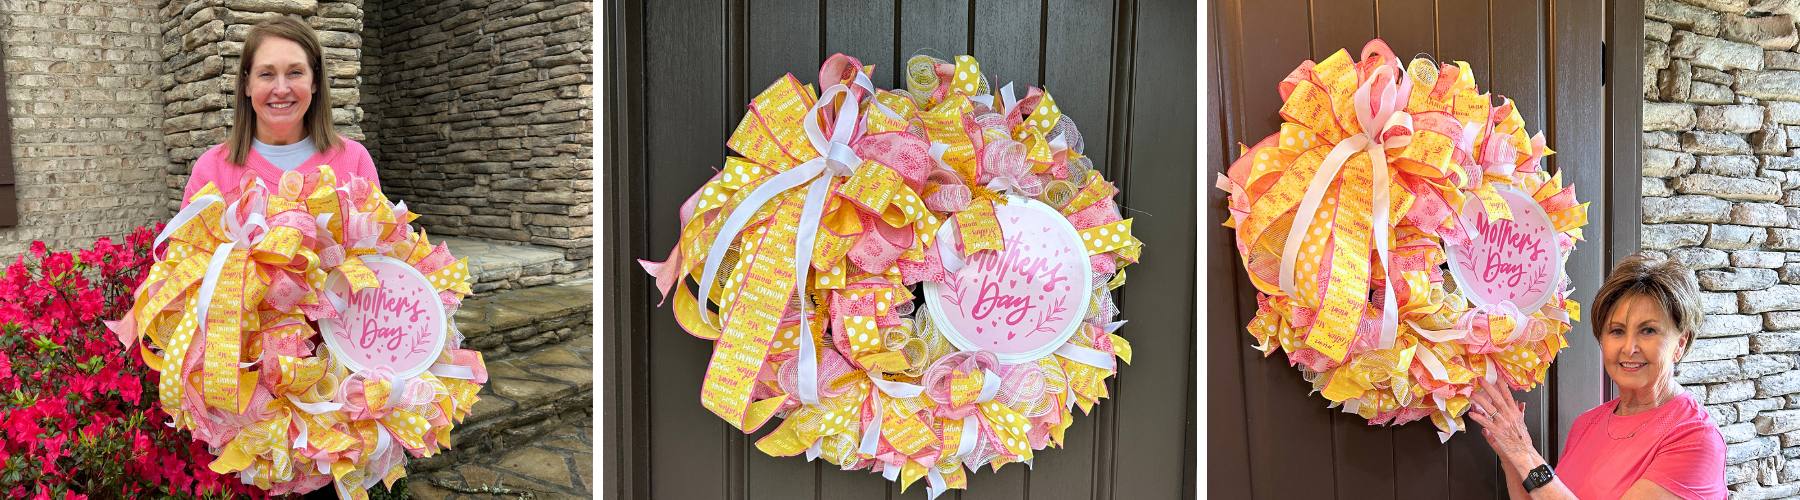 deco mesh mothers' day wreath